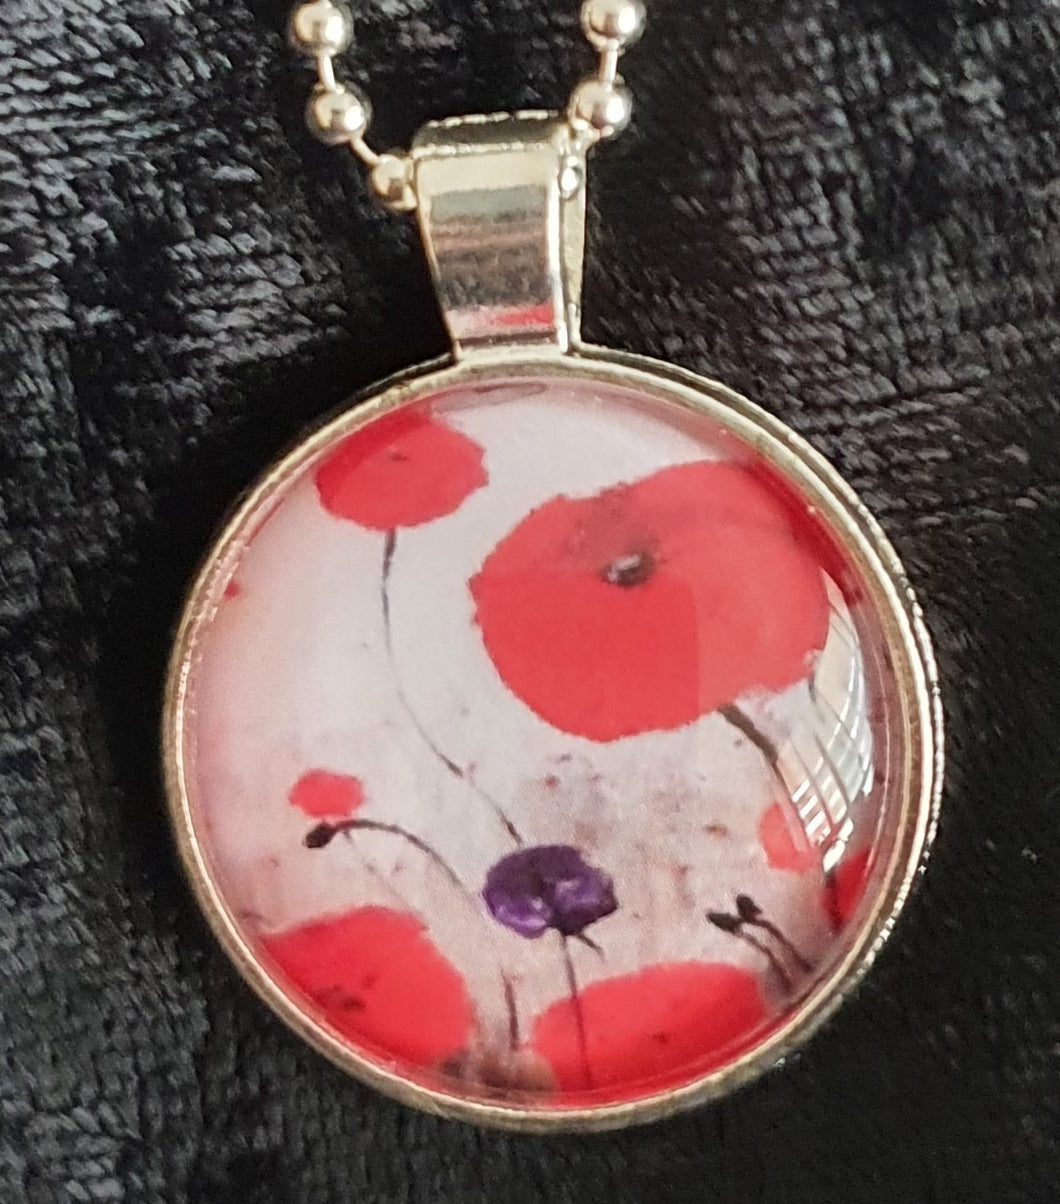 25mm Silver Pendant & Chain - Original painting of red poppies with an abstract background